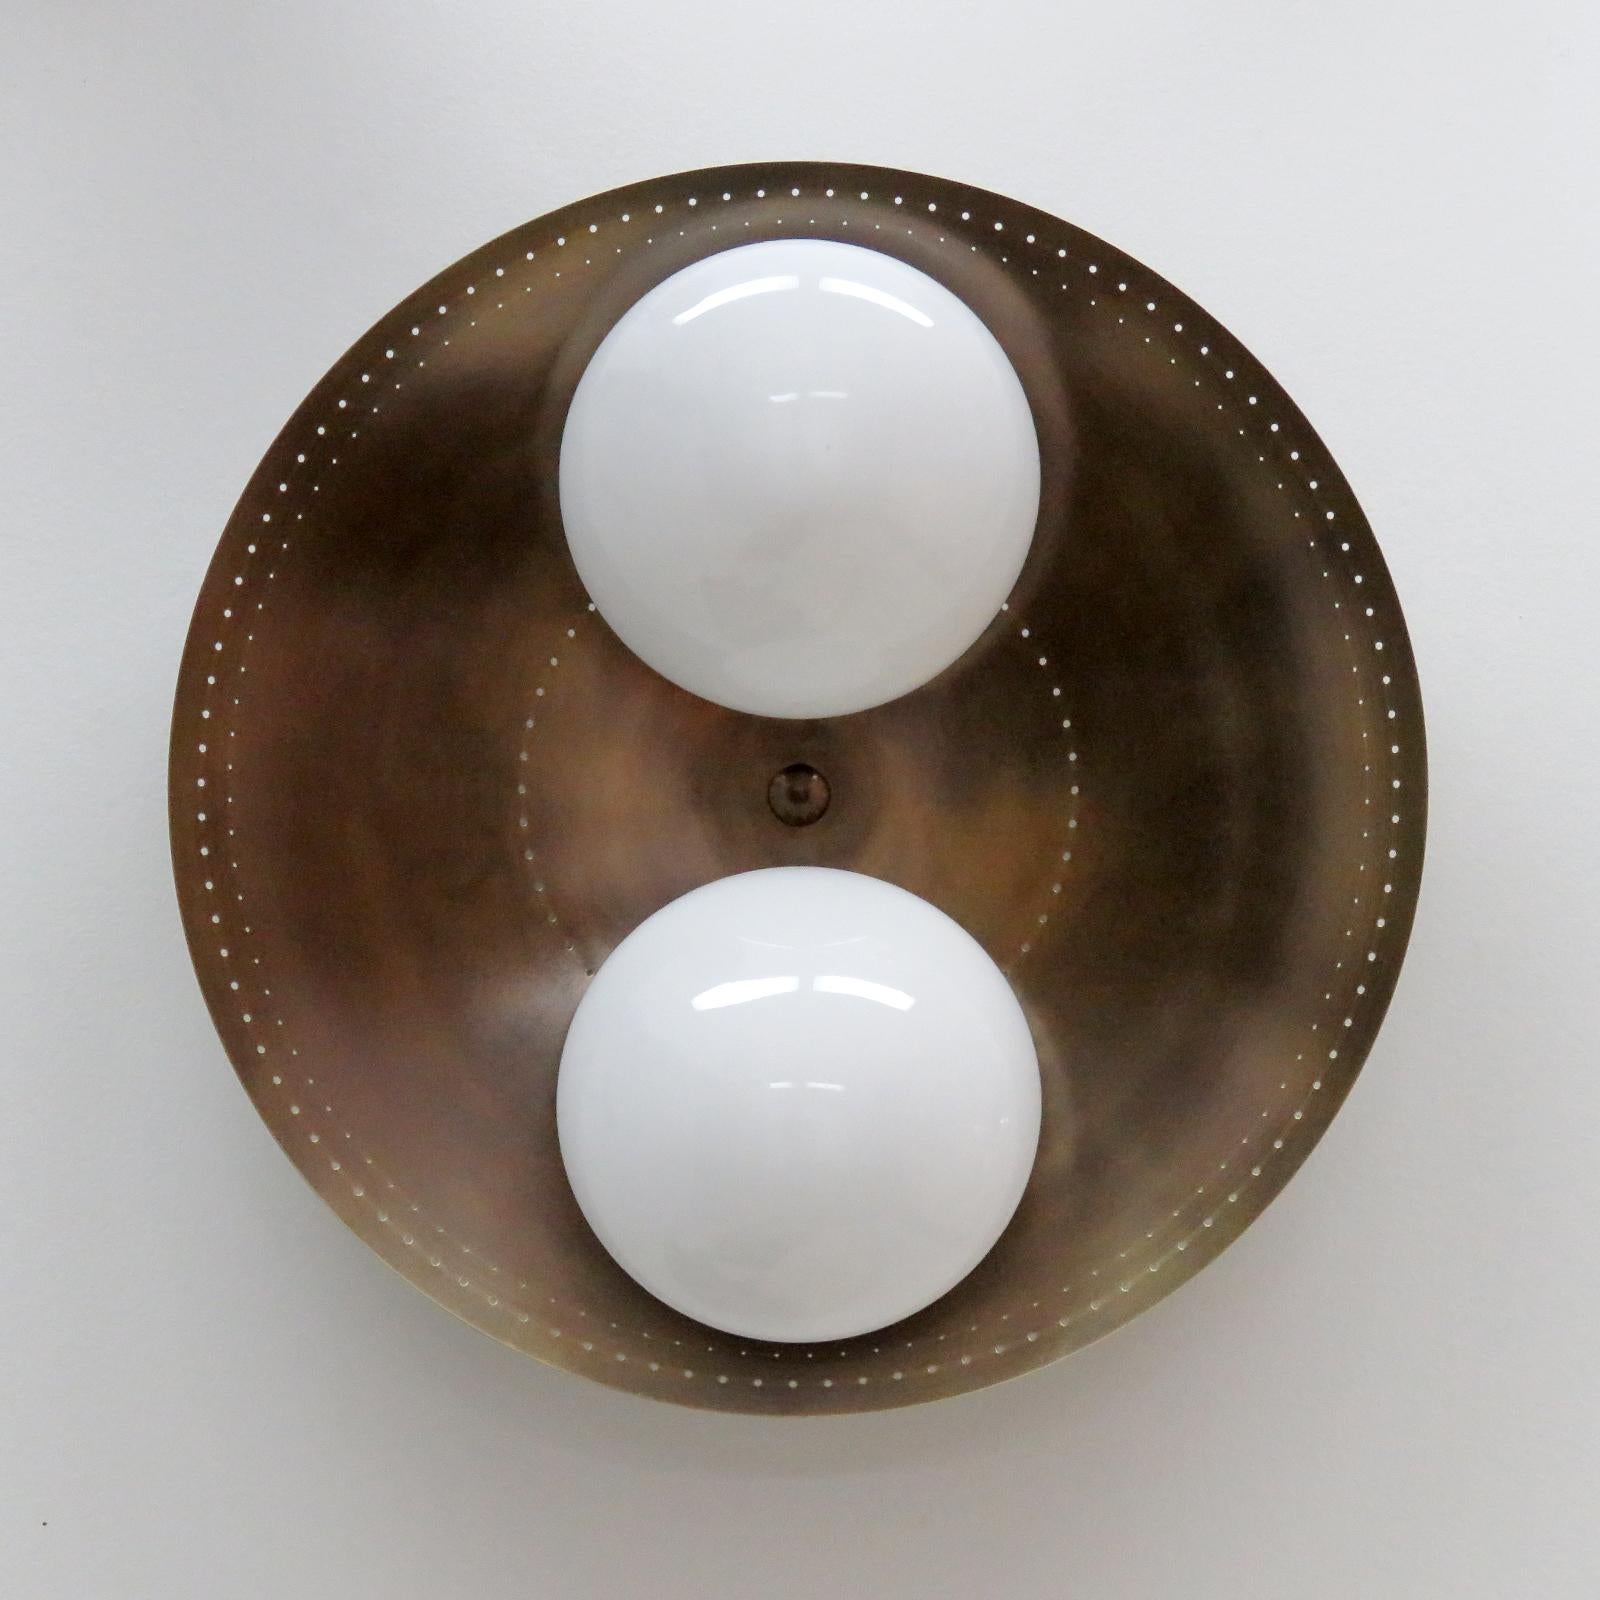 Elegant Binova-24 wall or ceiling light designed by Gallery L7, handcrafted and finished in Los Angeles from American brass, with two opaline glass shades on an aged raw brass disc. Two E26 sockets per fixture, max. wattage 60w each or 3-7w LED